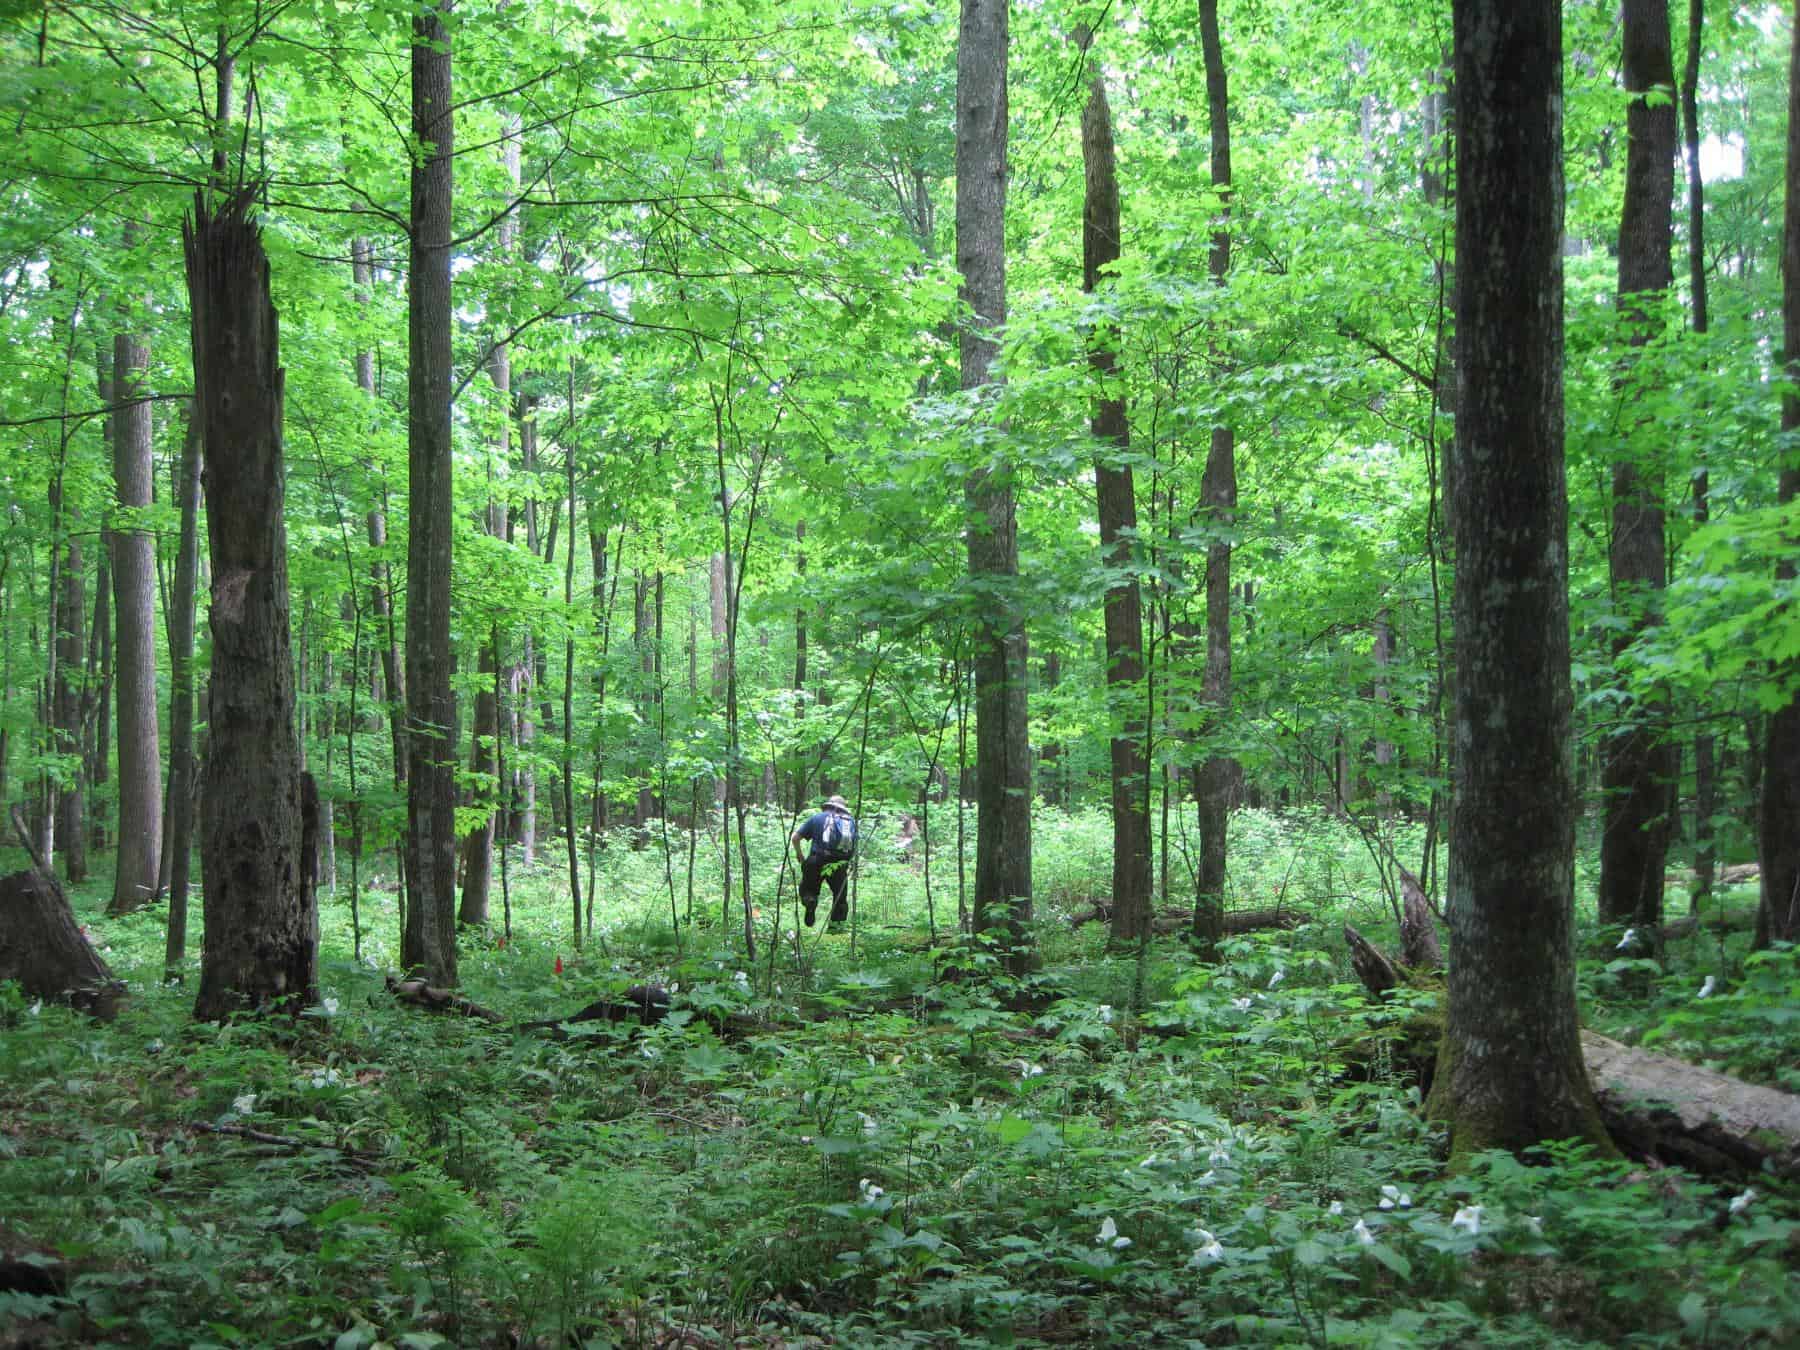 Phillip Jones stands in a gap where trees were removed to allow more light to reach the forest floor.